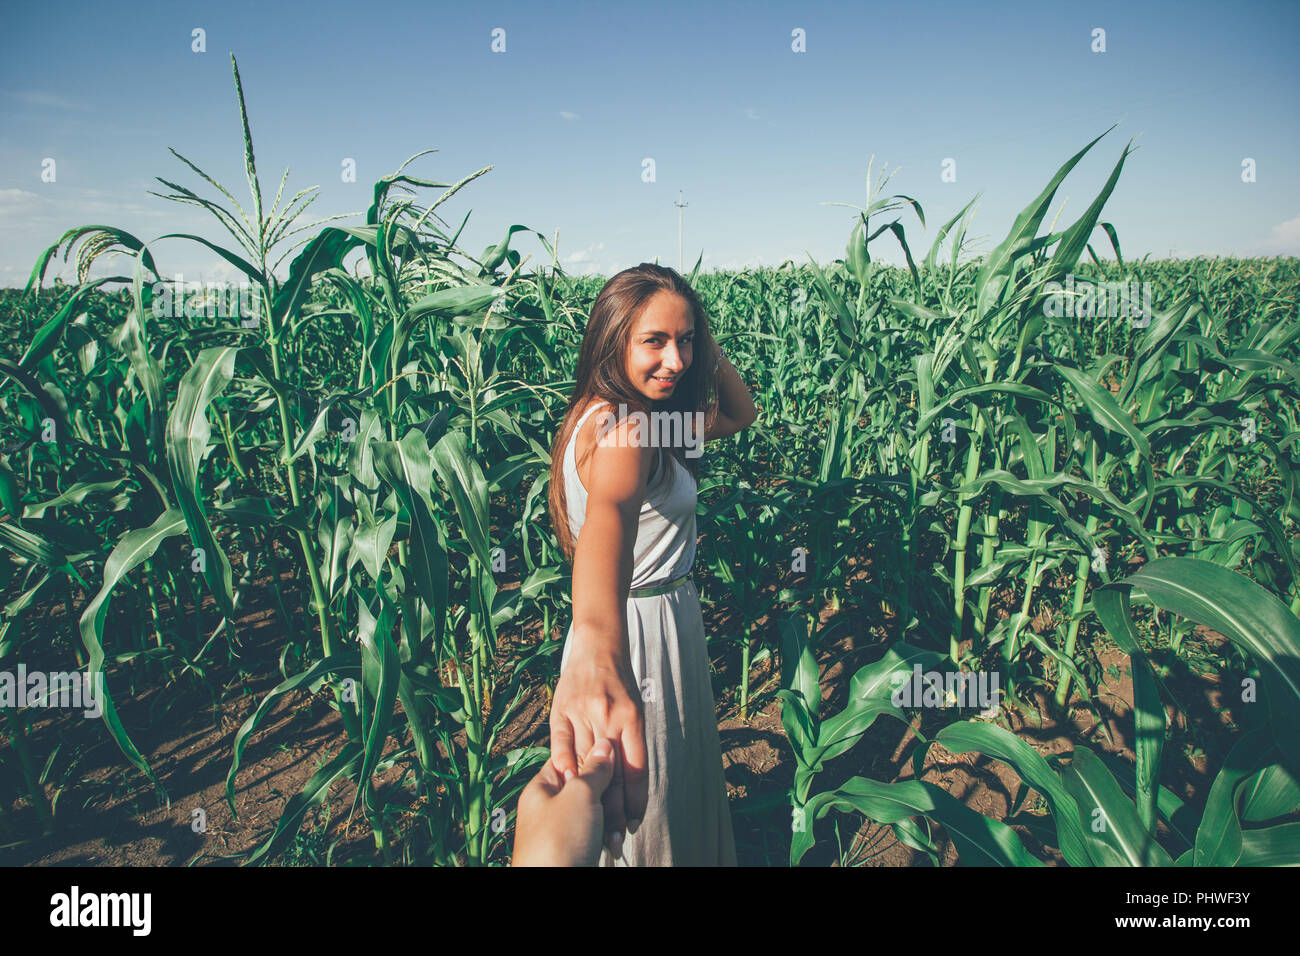 beautiful young woman tanned skin silver dress in the corn field portrait of follow me Stock Photo